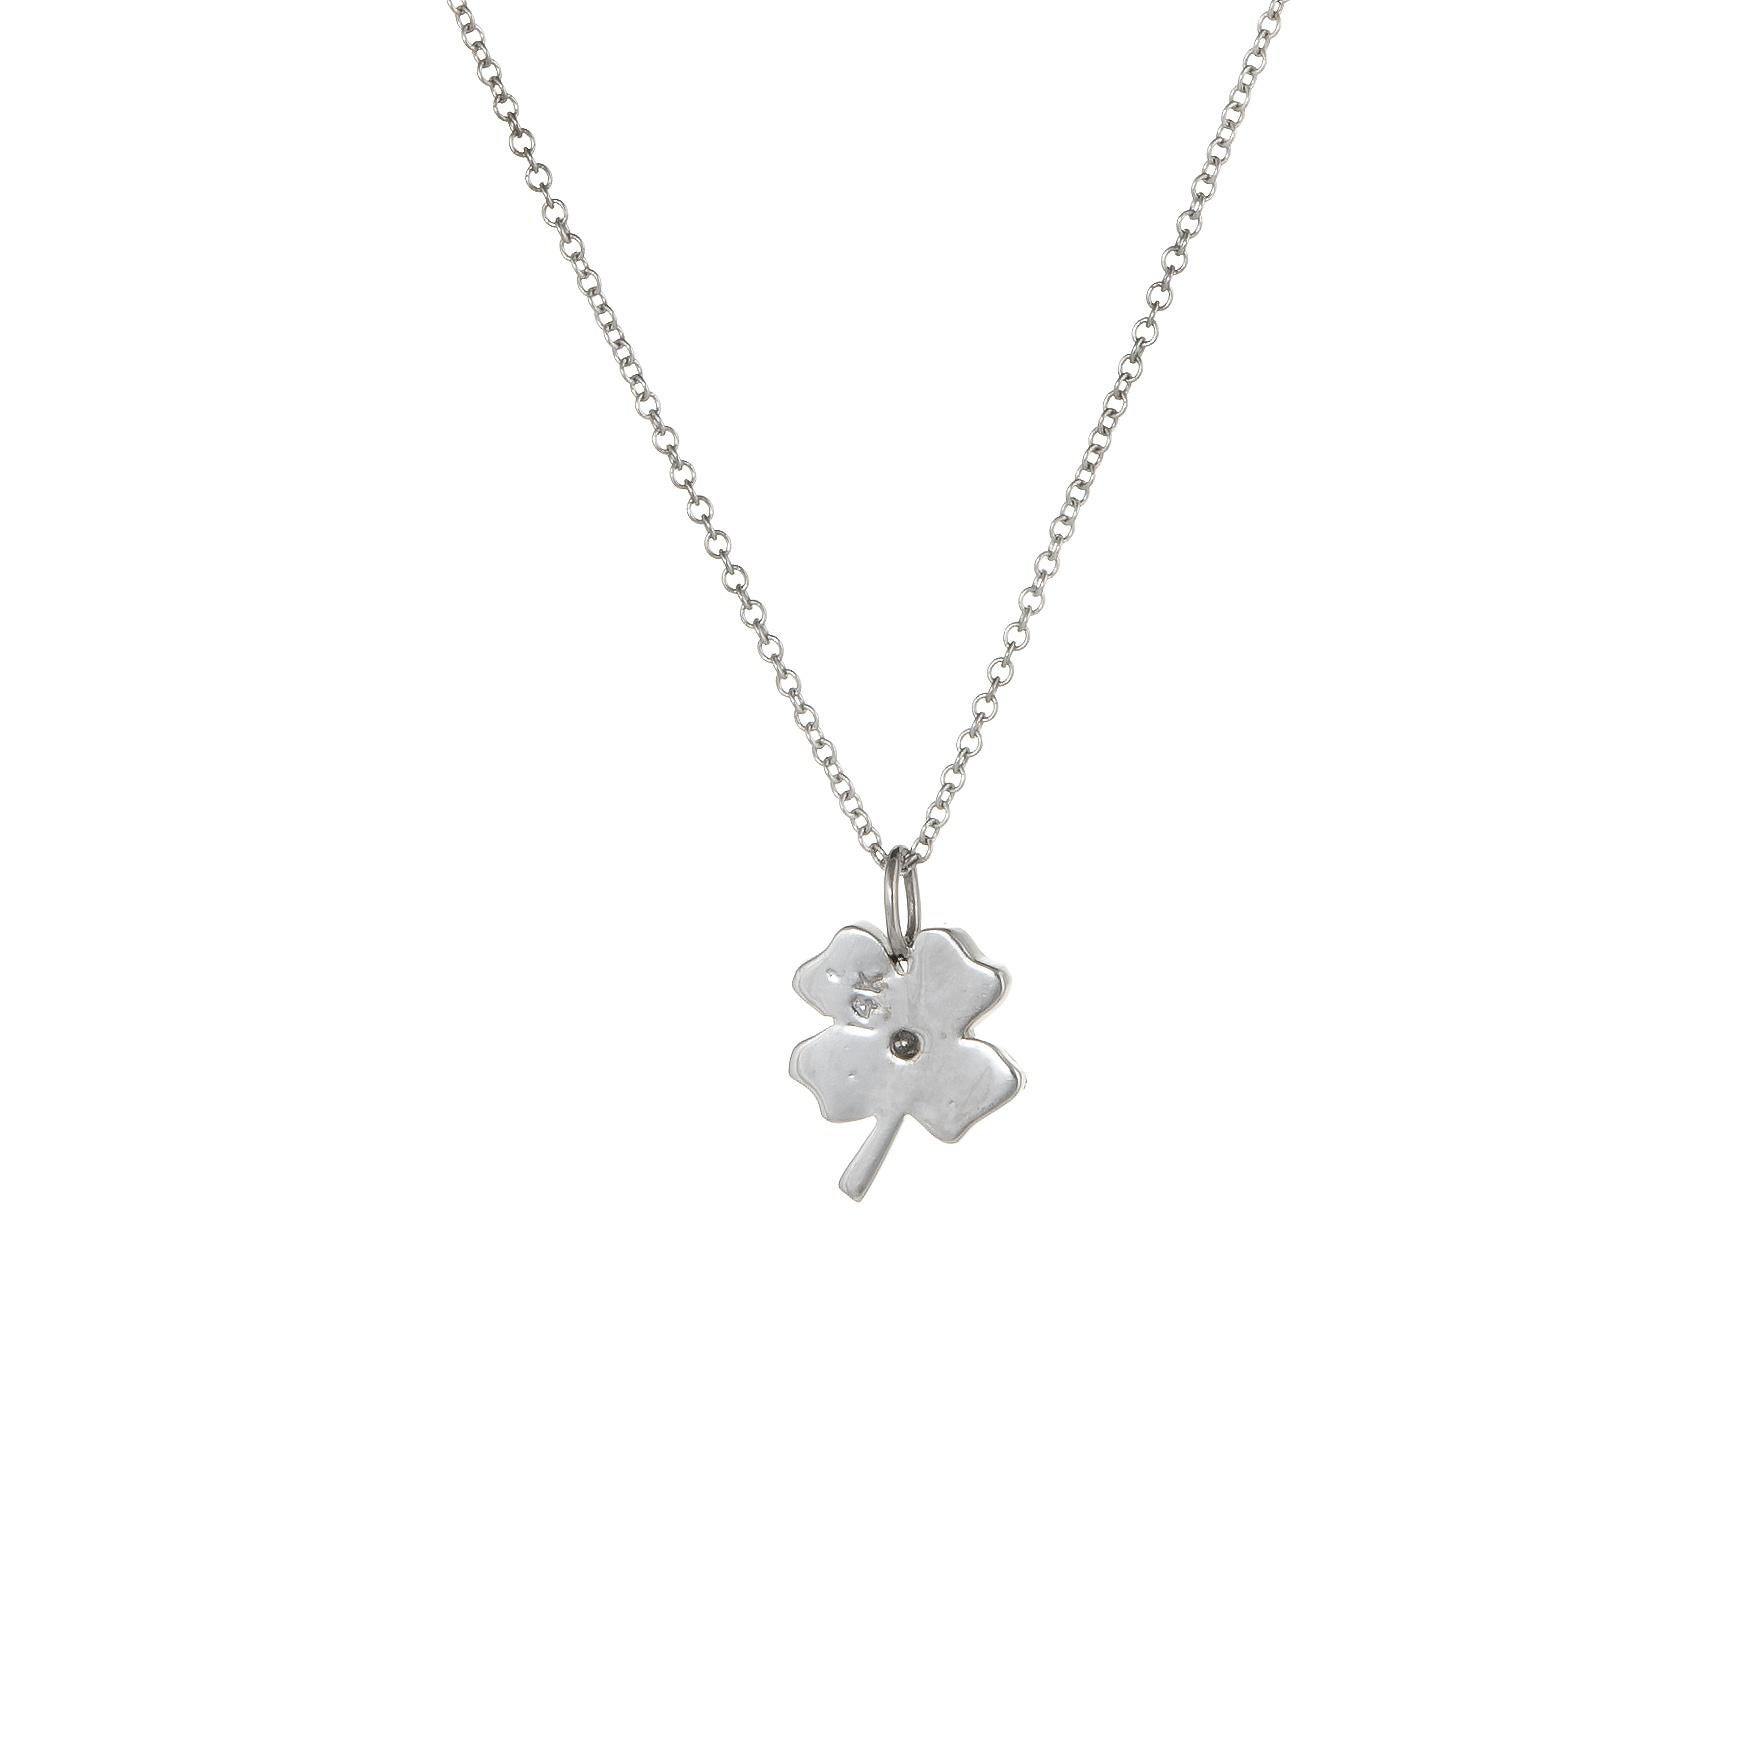 Stylish and finely detailed diamond four leaf clover necklace crafted in 14 karat white gold.  

Diamonds total an estimated 0.10 carats (estimated at H-I color and SI2-I2 clarity). 

The four leaf clover is petite in scale and ideal worn alone or